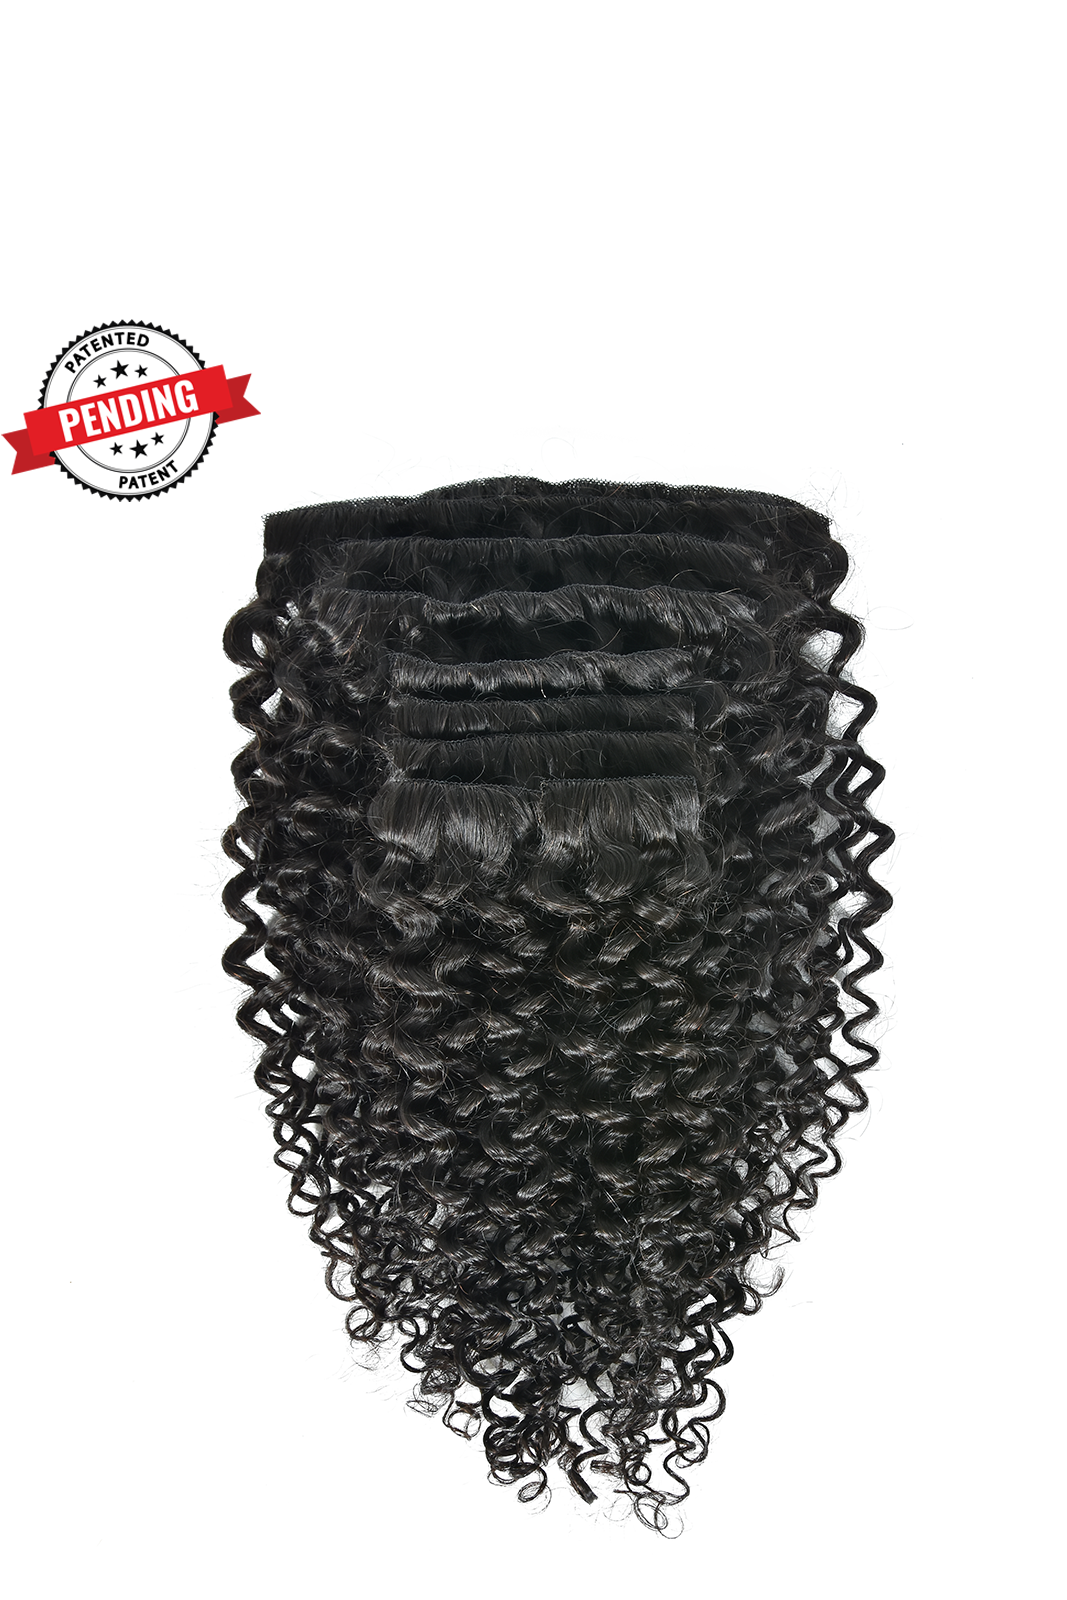 Wig/Weave Clips, Standard, 10 Pieces at I Kick Shins